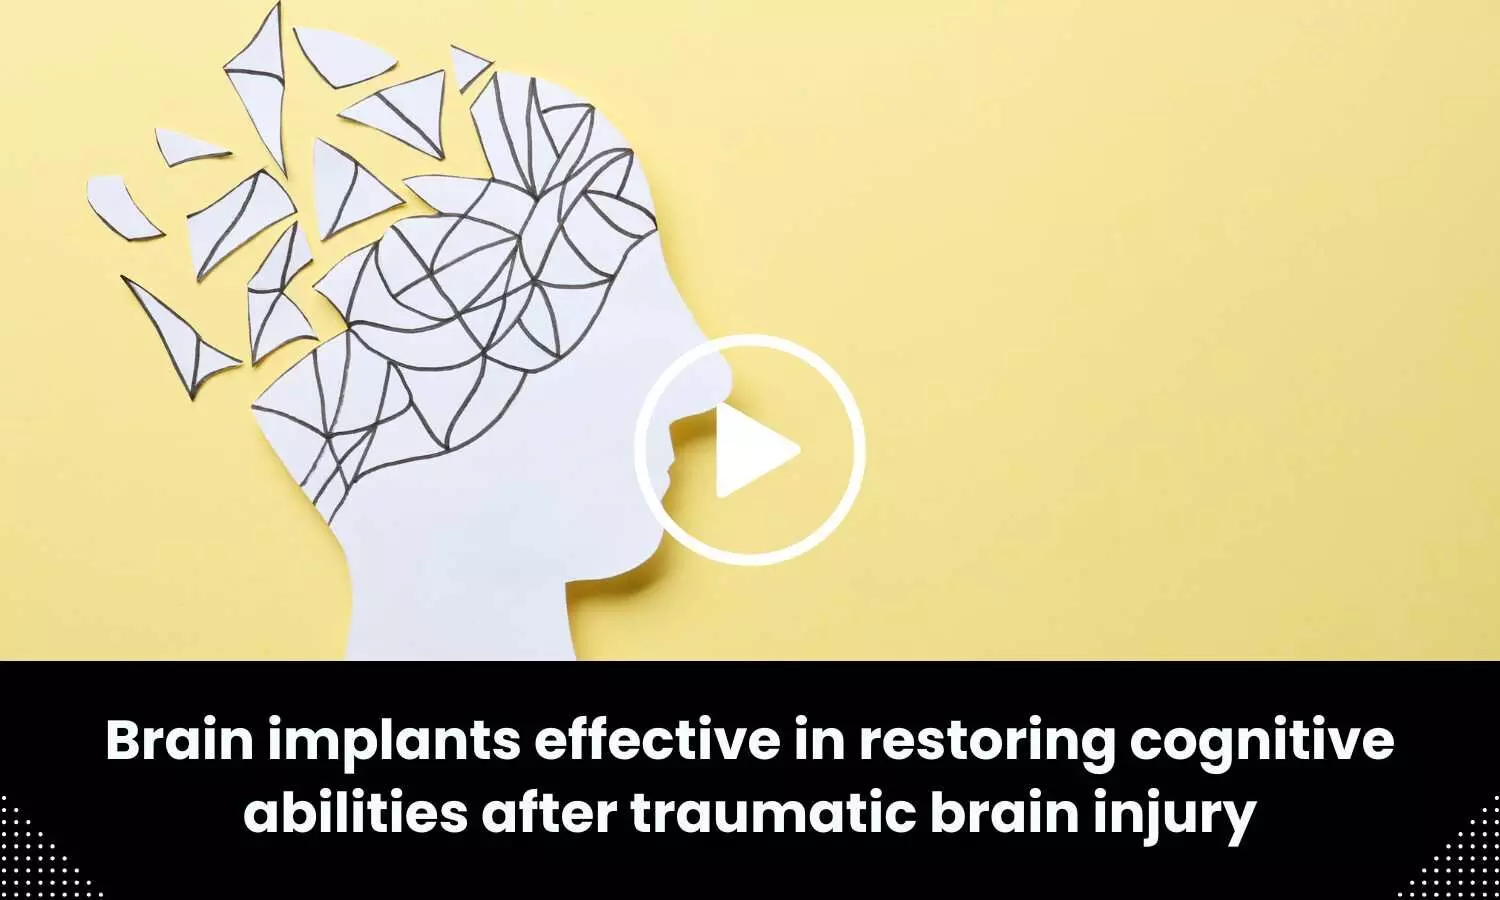 Brain implants effective in restoring cognitive abilities after traumatic brain injury